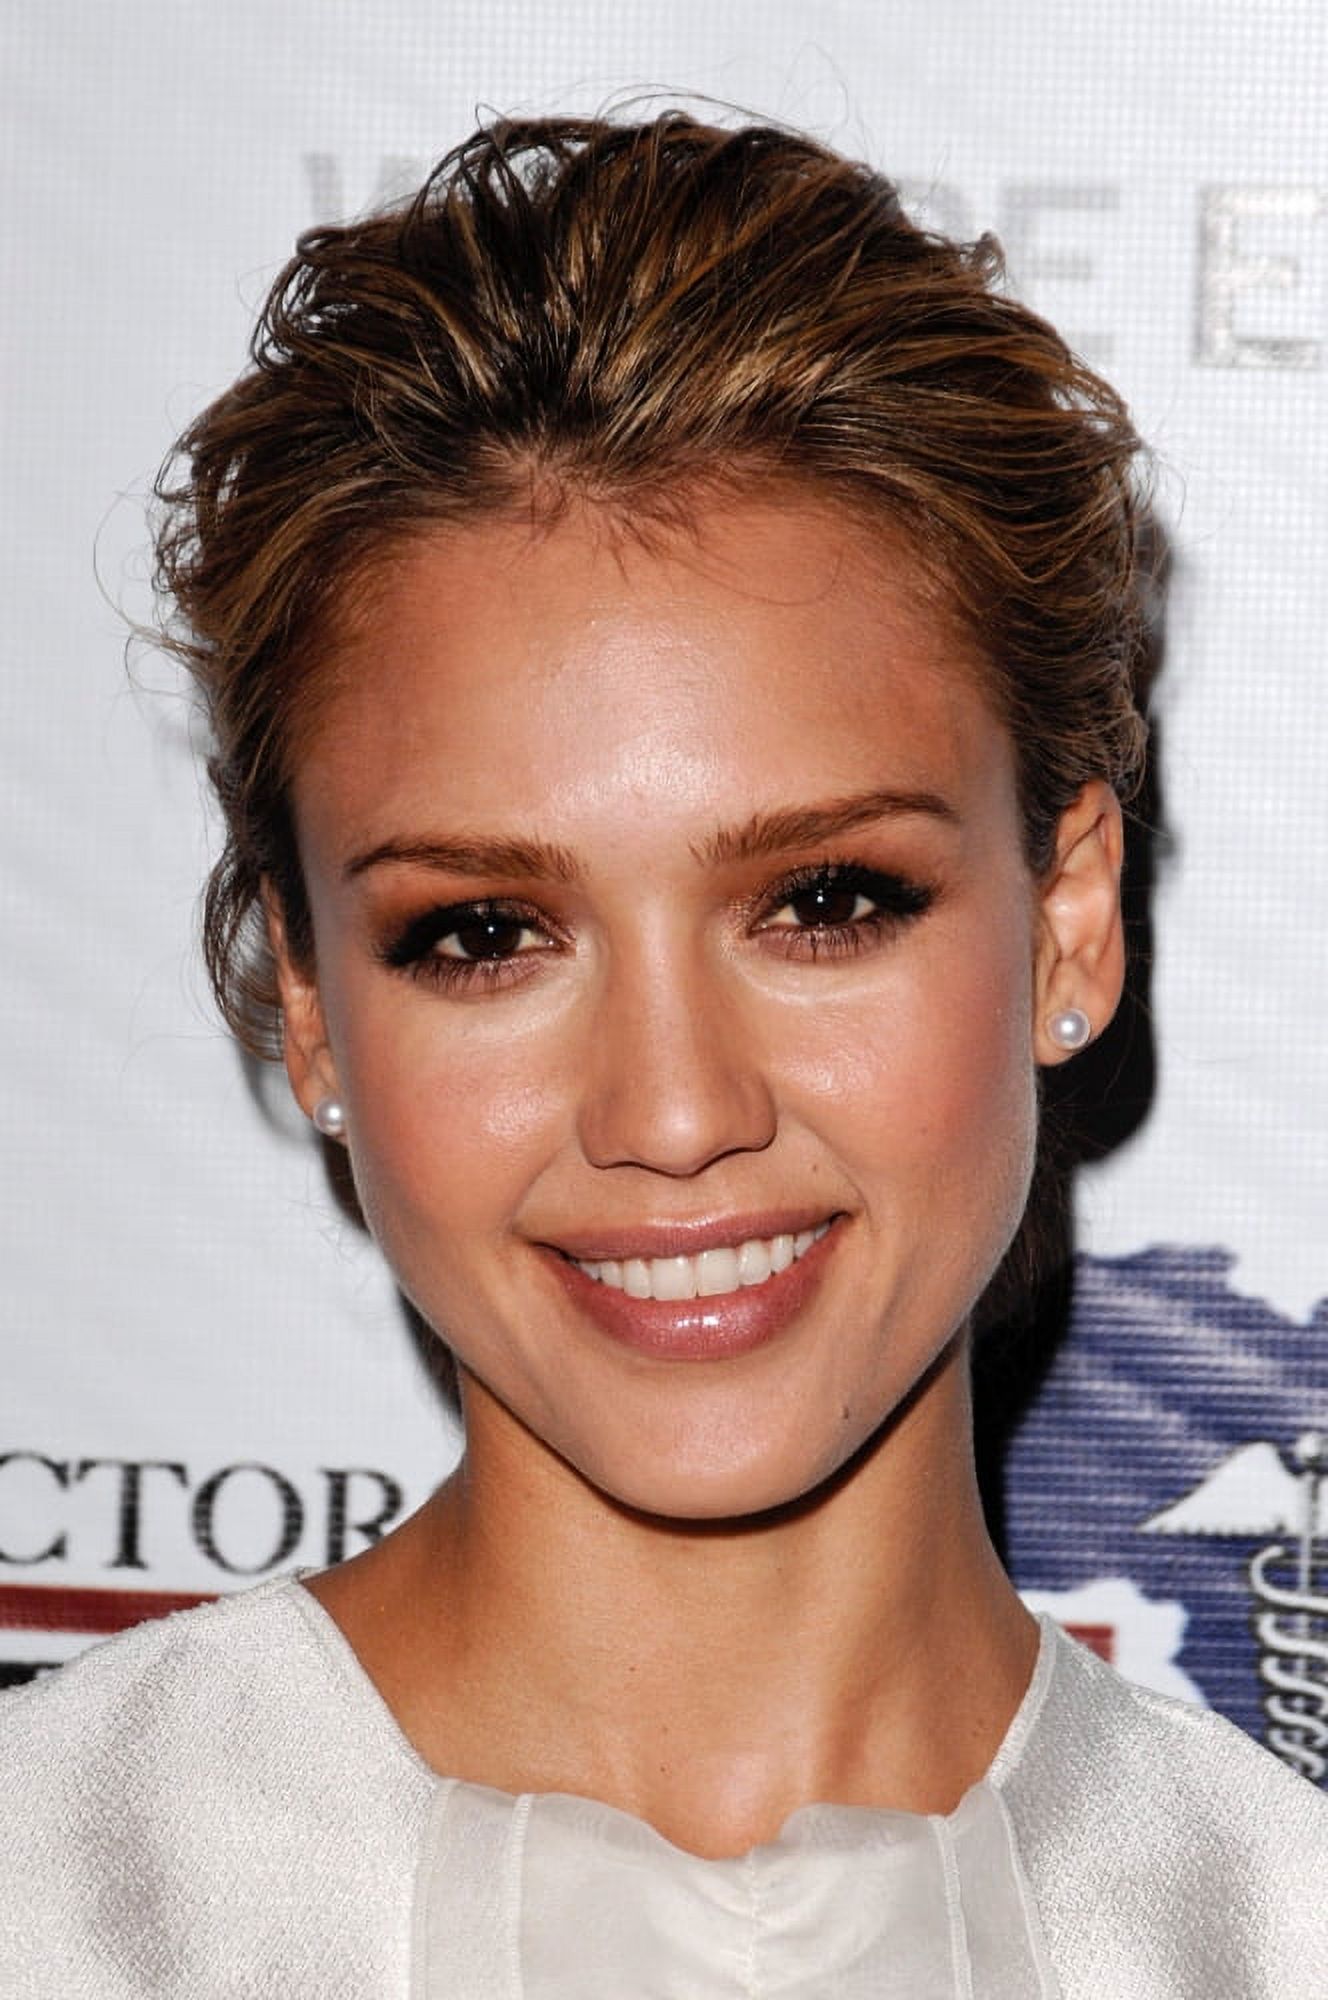 Jessica Alba At Arrivals For African First Ladies Health Summit, The Beverly Hilton, Los Angeles, Ca April 21, 2009. Photo By: Roth Stock/Everett Collection Photo Print (8 x 10) - image 1 of 1